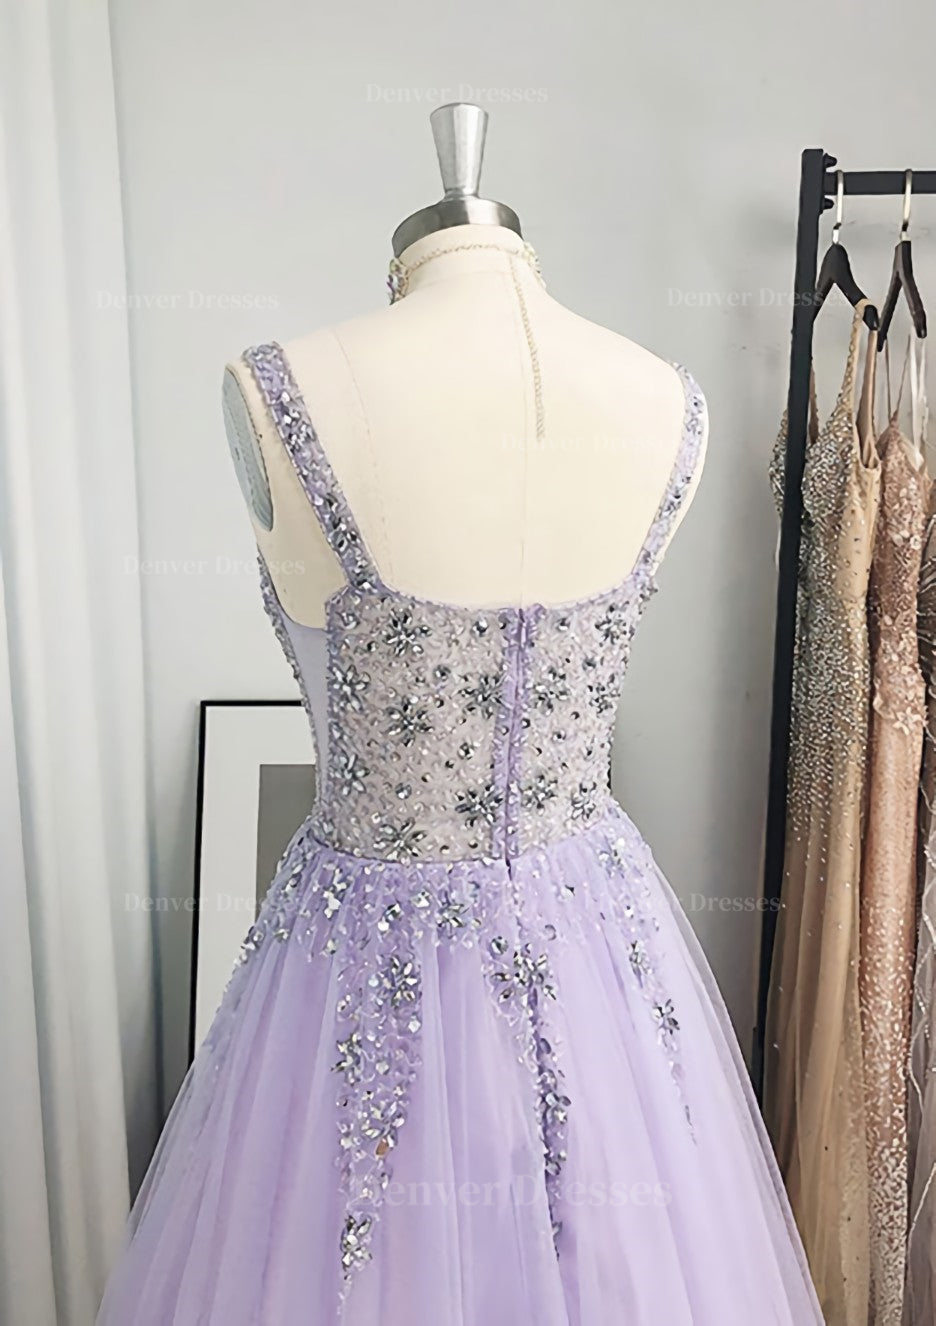 Party Dress Baby, A-line/Princess V Neck Long/Floor-Length Tulle Prom Dress With Beading Sequins